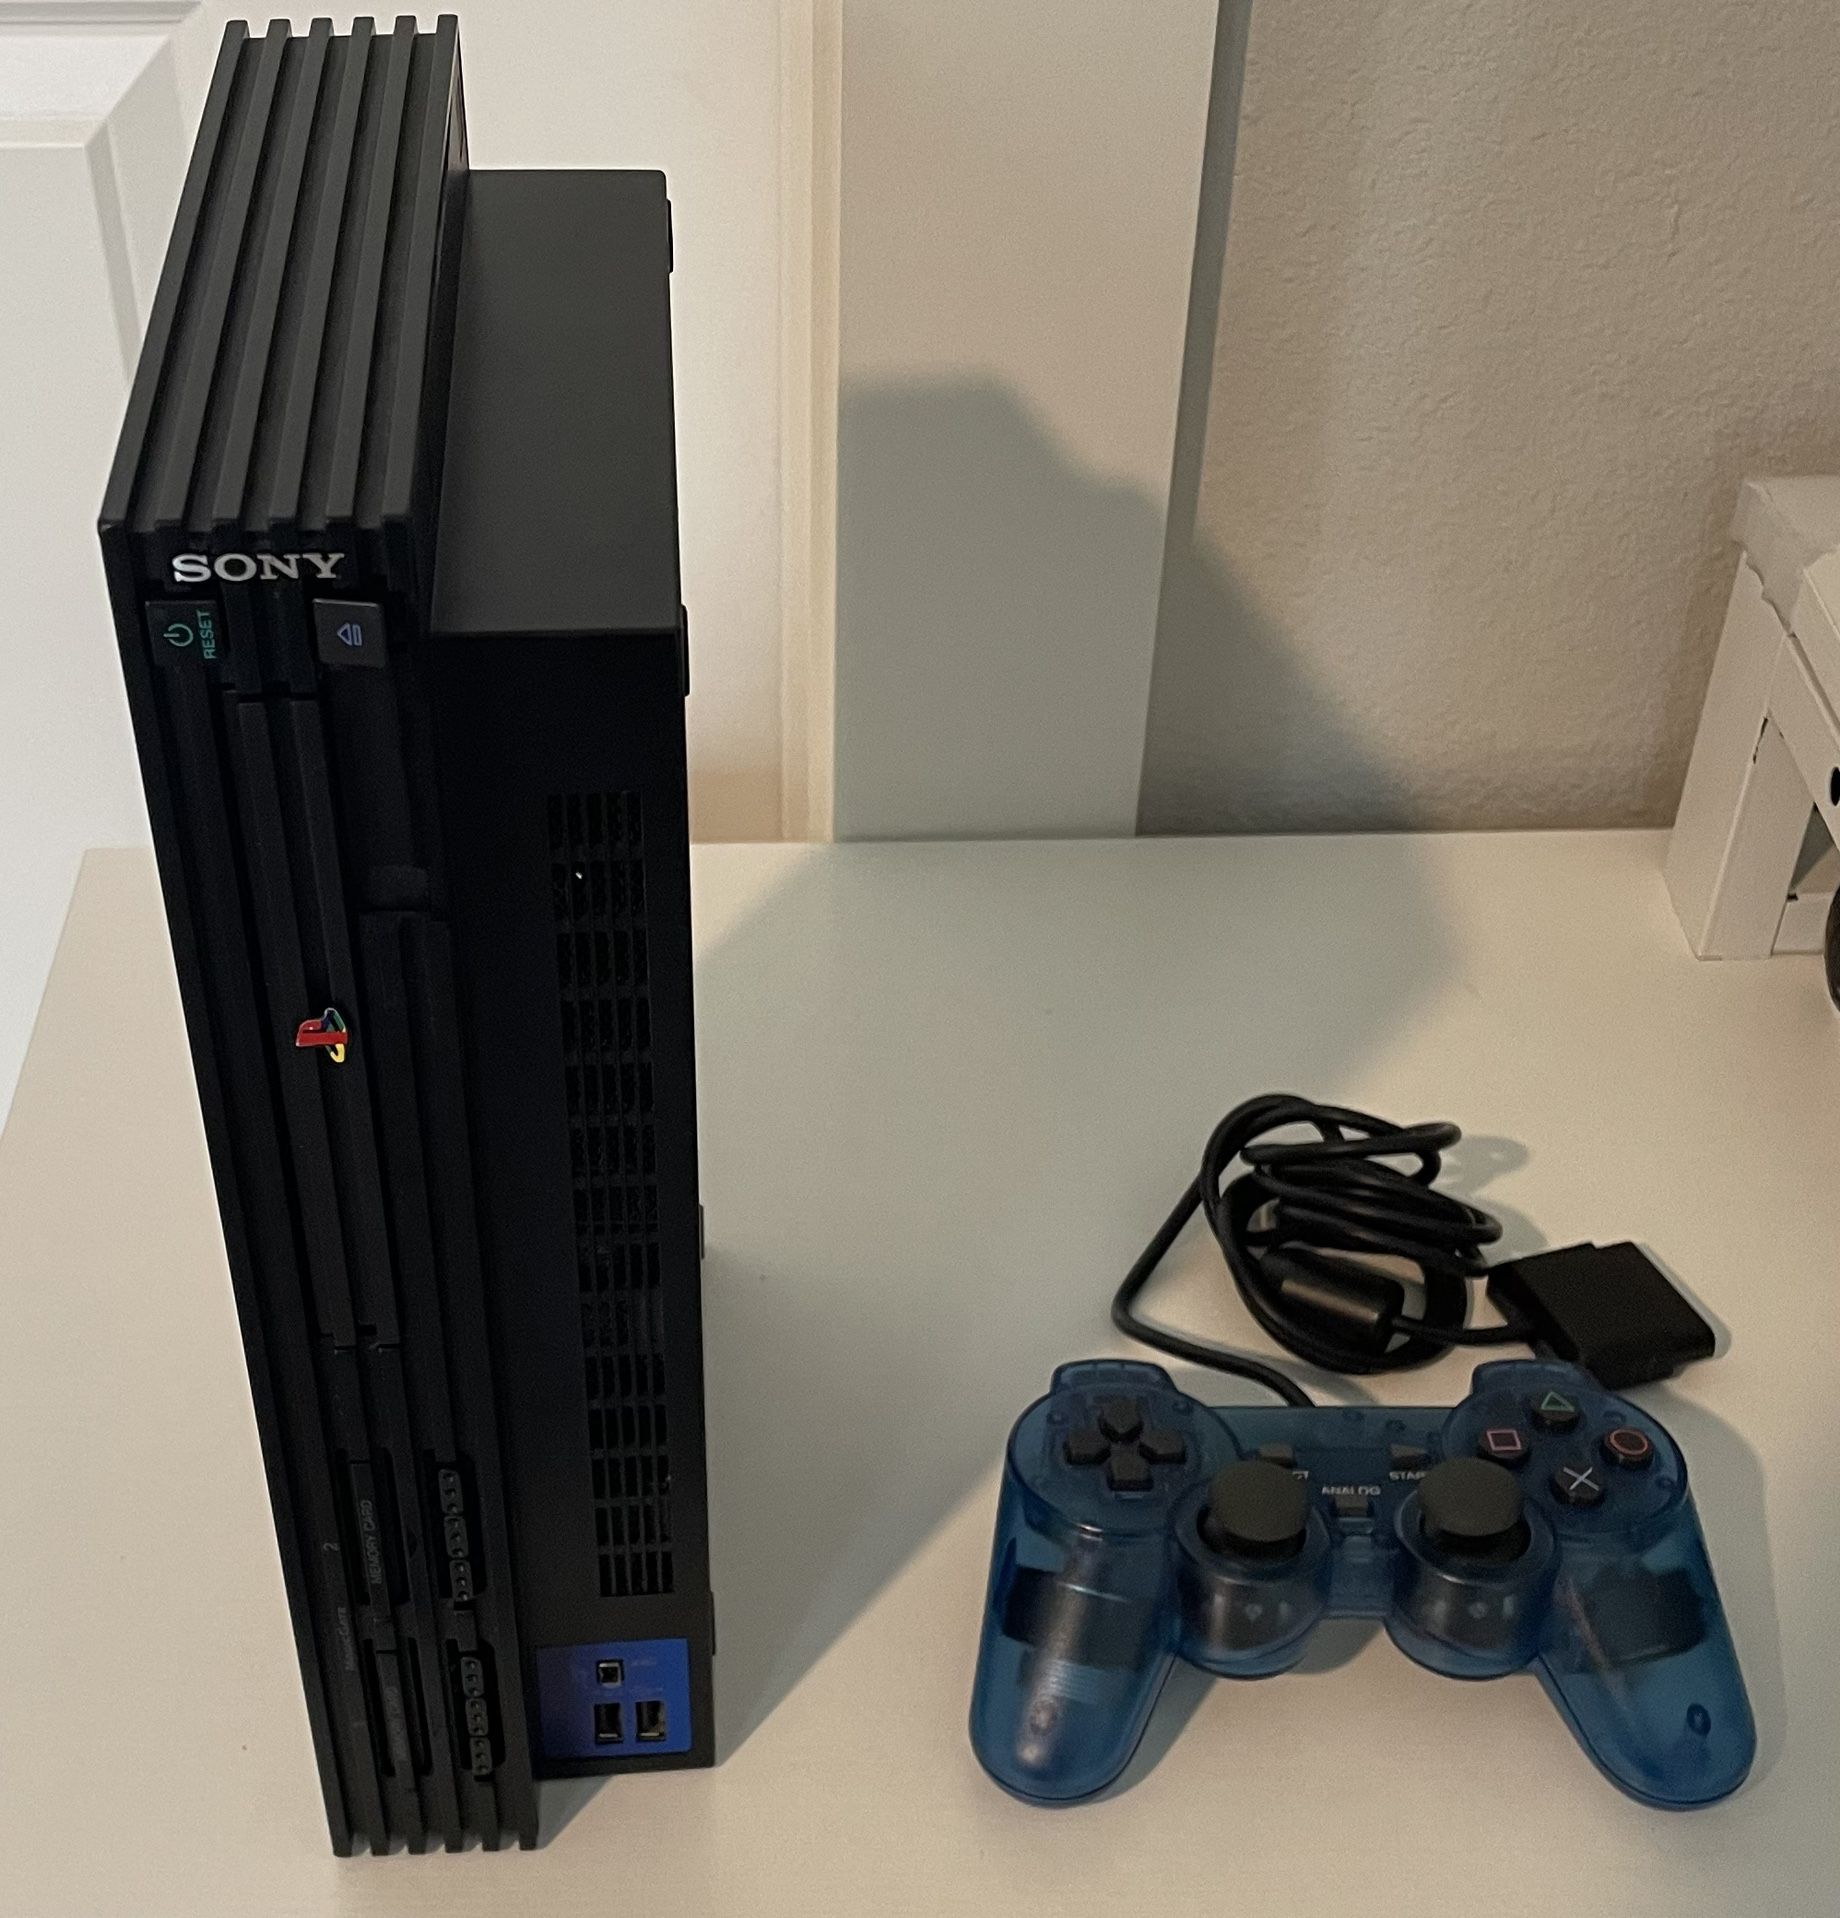 Ps2 with transparent blue controller 